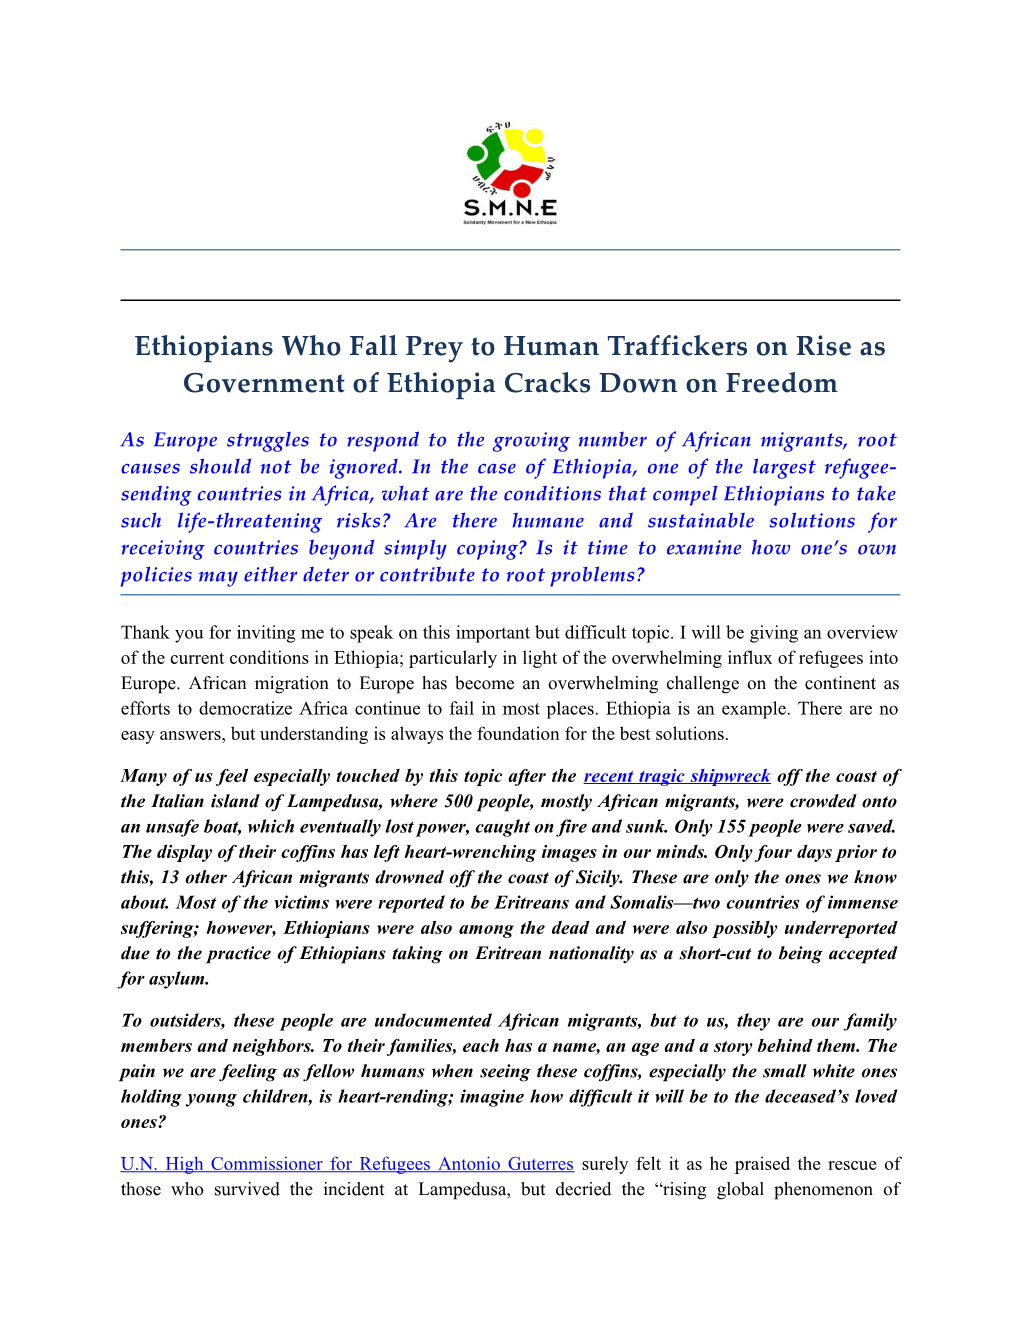 Ethiopians Who Fall Prey to Human Traffickers on Rise As Government of Ethiopia Cracks